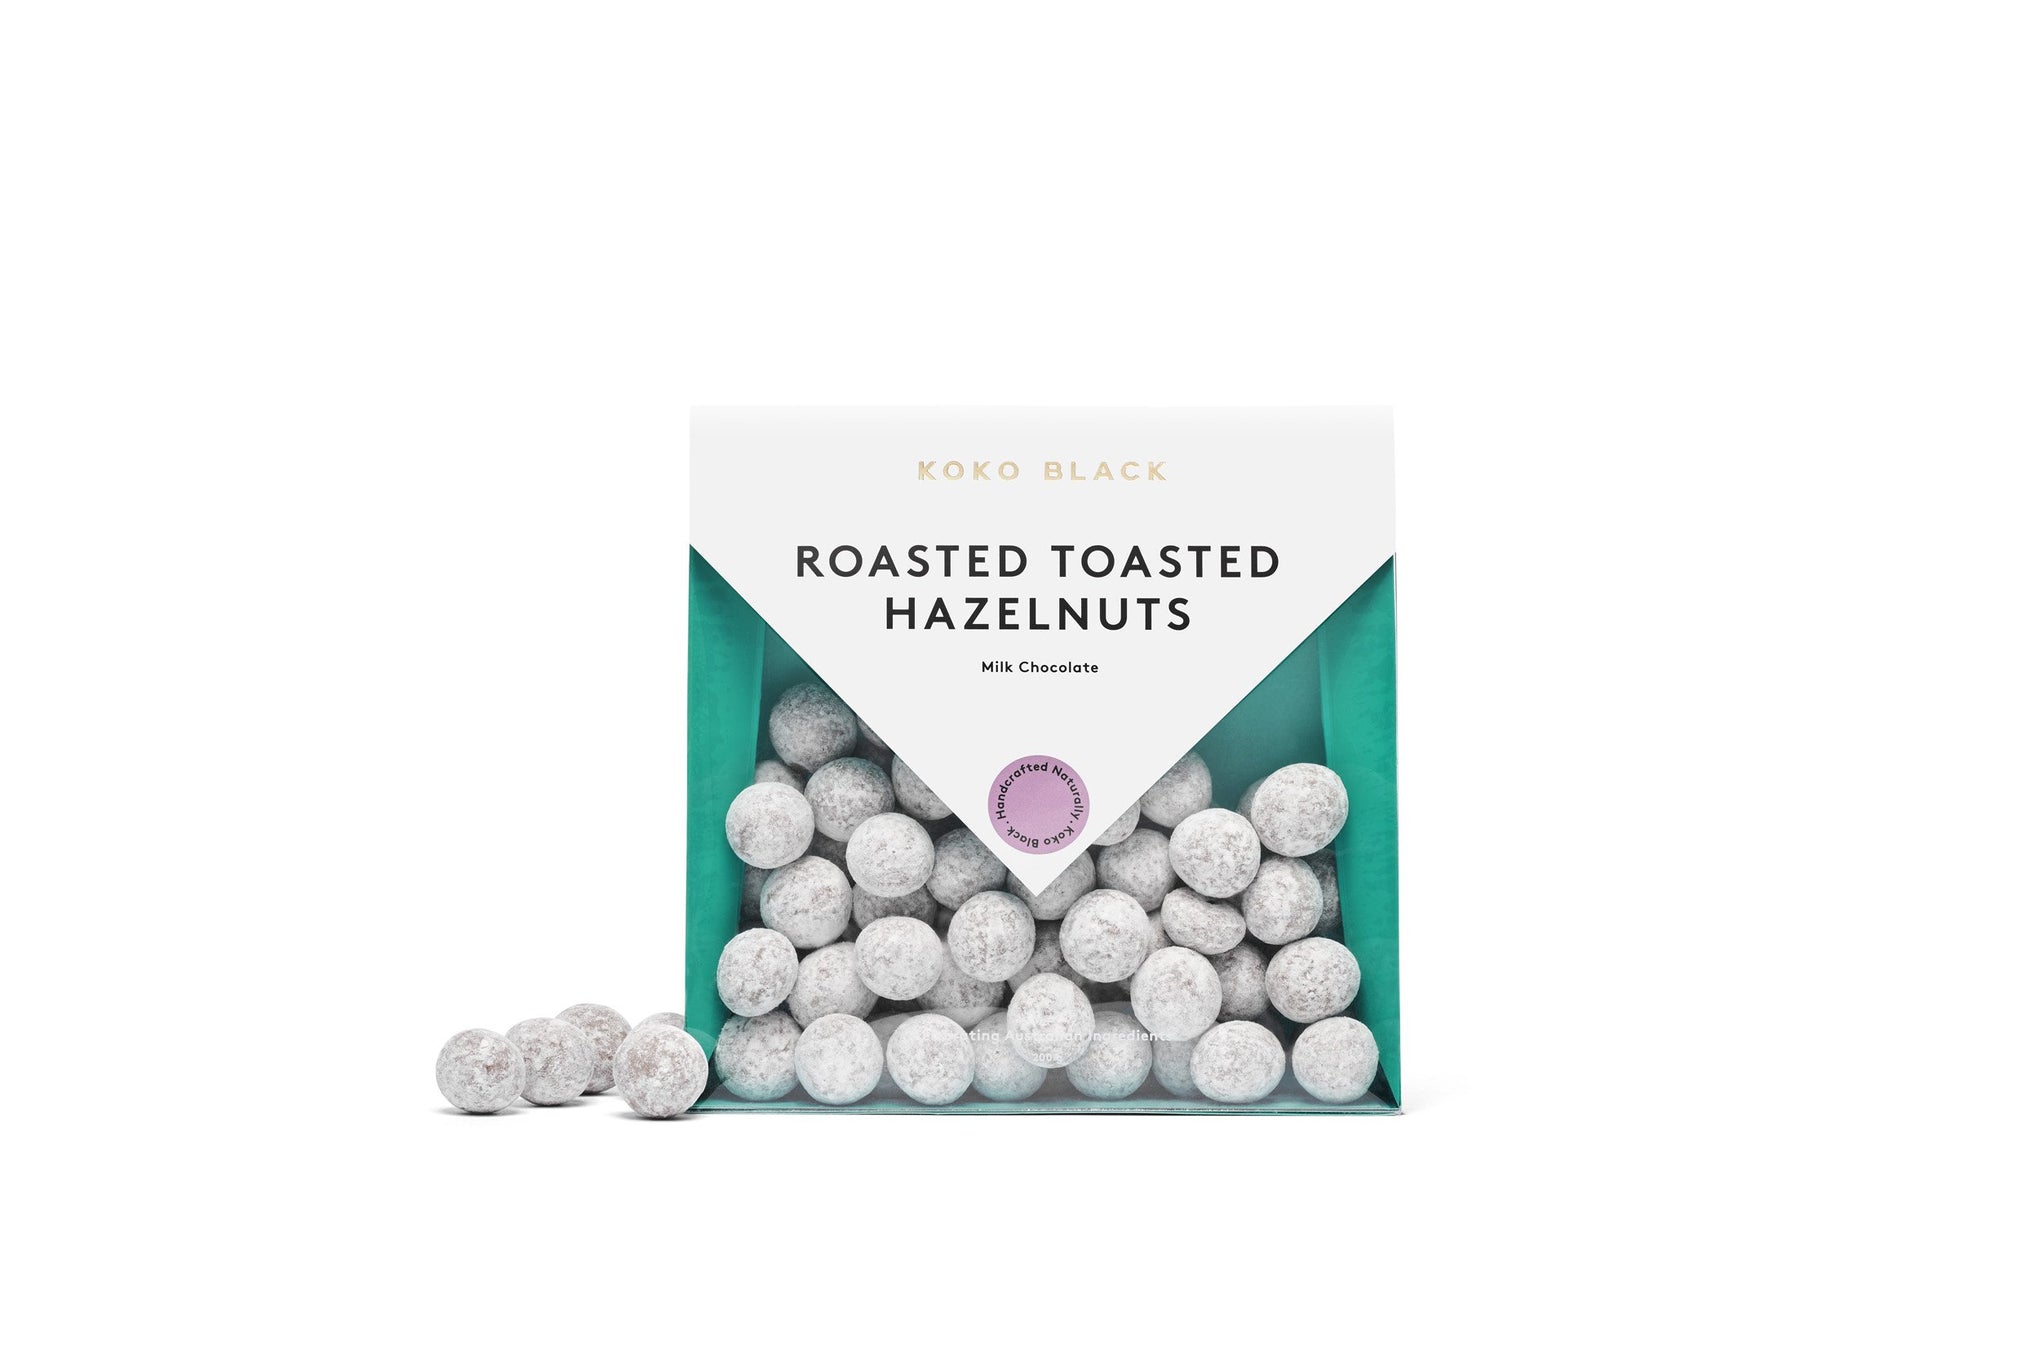 Dusted chocolate hazelnuts beside packaging